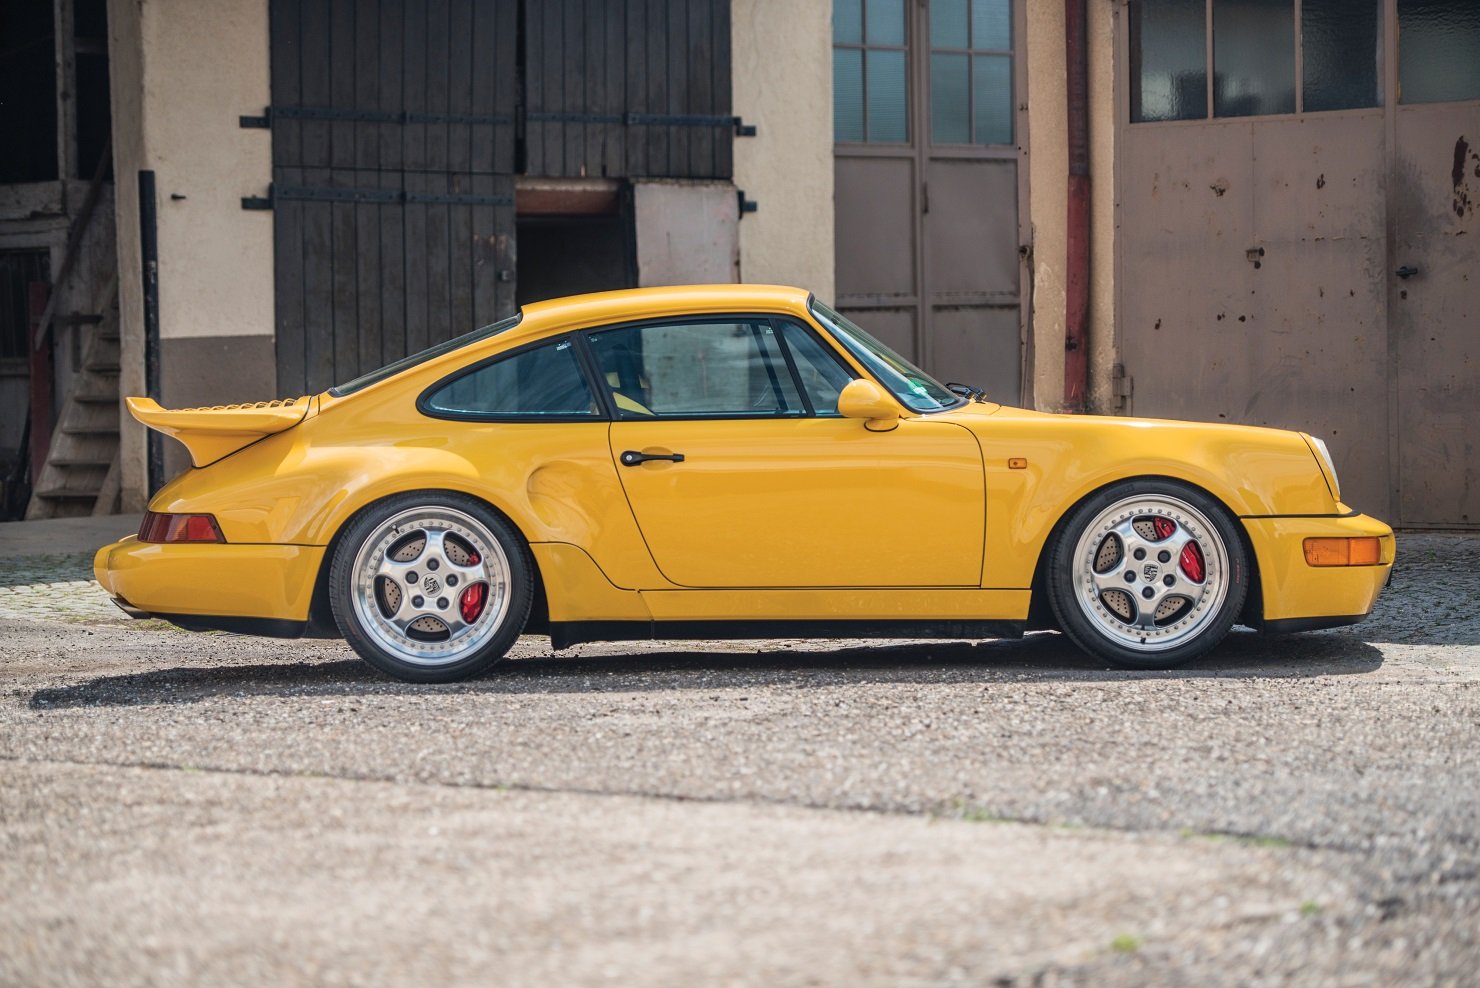 Porsche 911 Turbo S 3 3 Leichtbau Prototyp 964 Cars Yellow 1992 Wallpapers Hd Desktop And Mobile Backgrounds